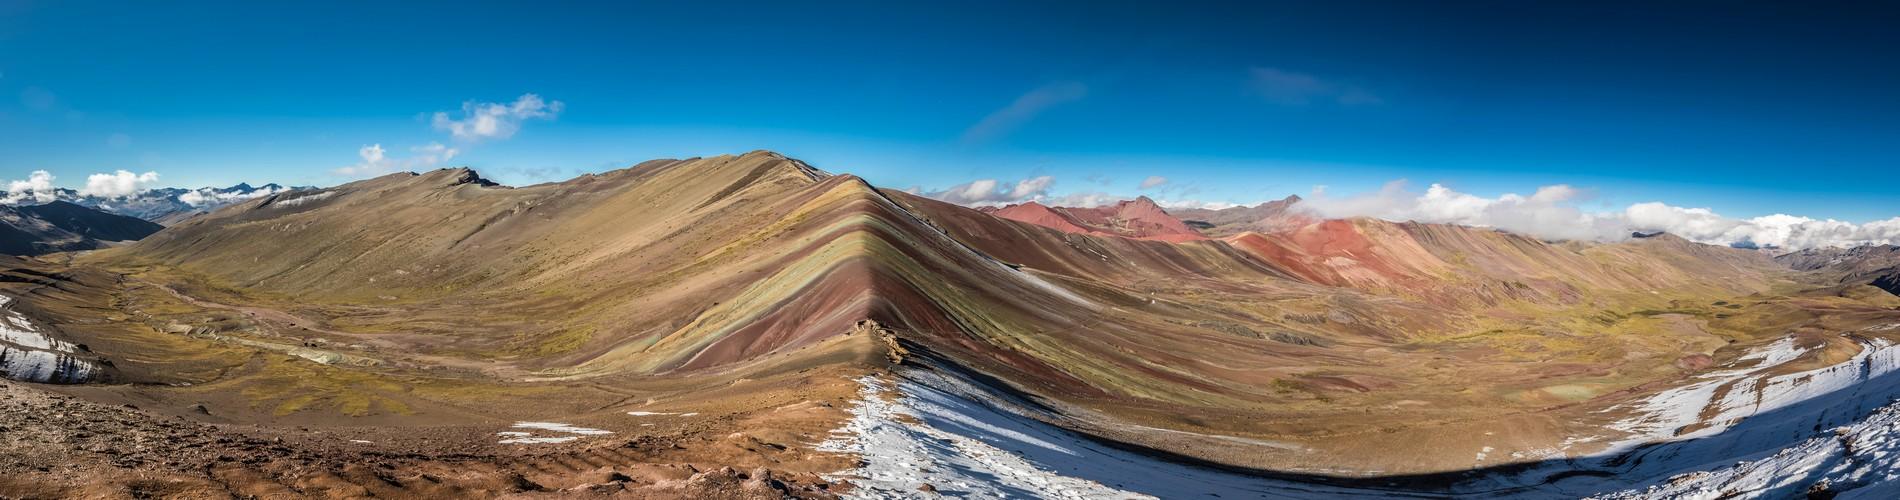 TRAVEL PHOTOGRAPHY-THE CAPTIVATING AUSANGATE AND RAINBOW MOUNTAIN